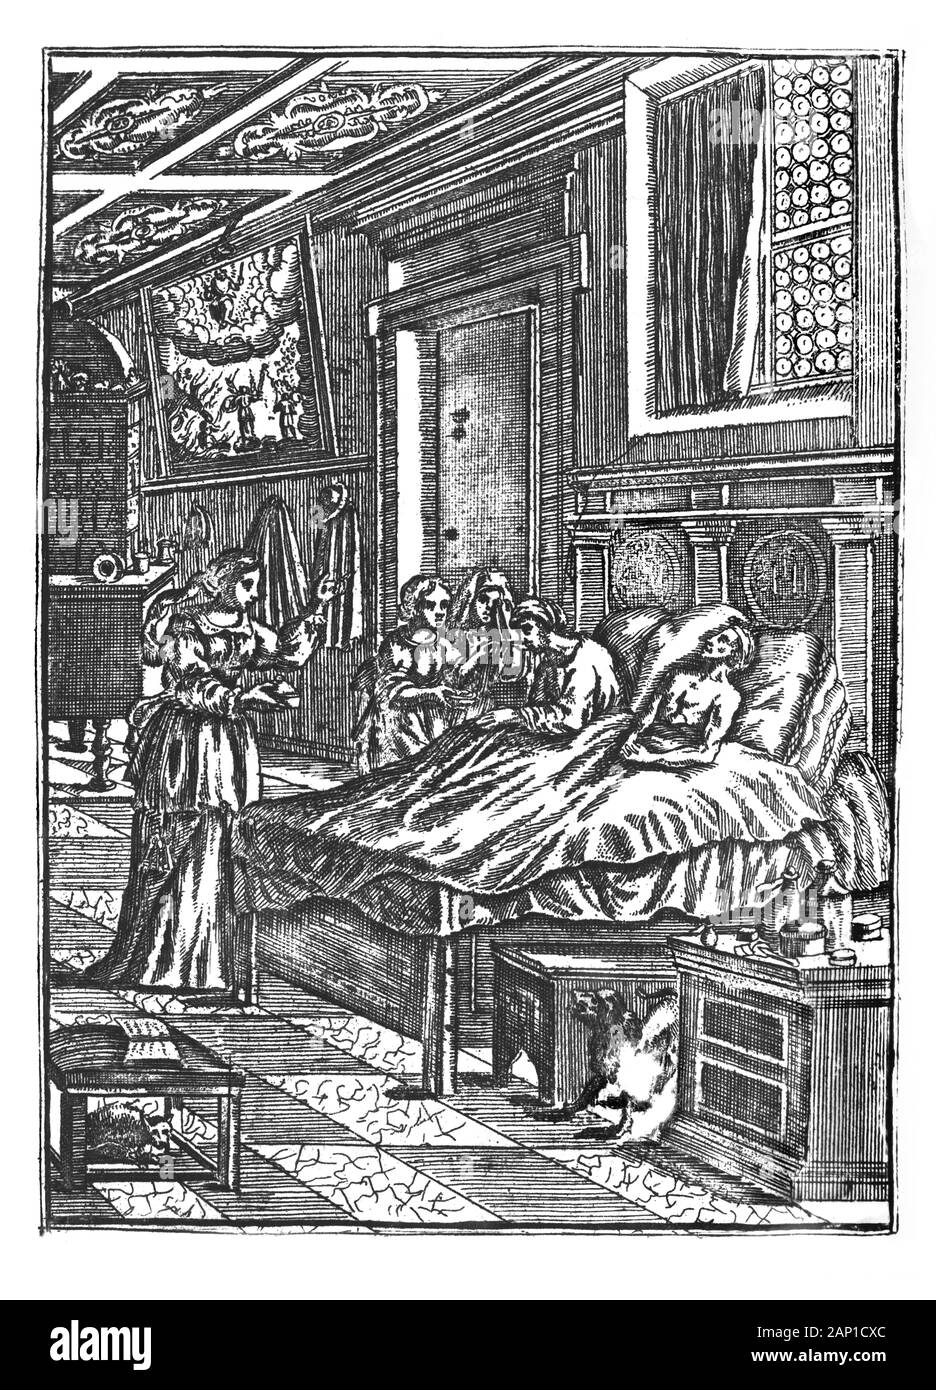 Antique vintage historical engraving or drawing of two sick man lying in bed in care of three women. Treatment, Healthcare in the Past.Illustration from Book Die Betrubte Und noch Ihrem Beliebten..., Austrian Empire,1716. Artist is unknown. Stock Photo